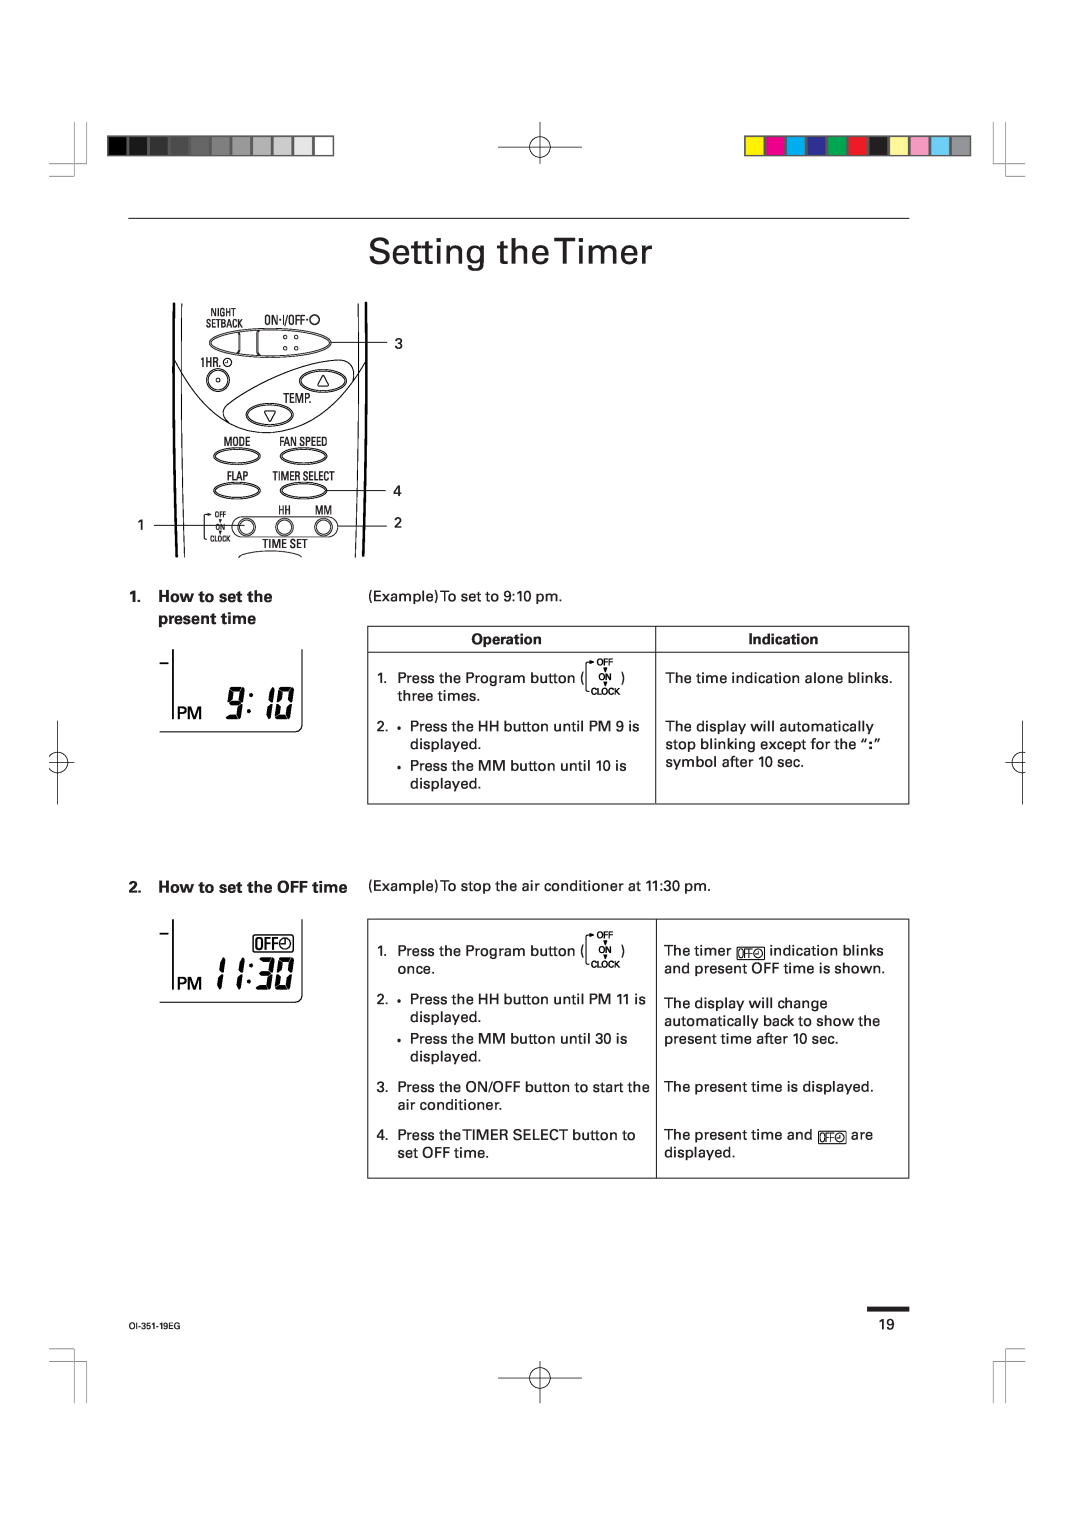 Sanyo KHS0951, KHS1852, KHS1251 instruction manual Setting theTimer, How to set the present time 